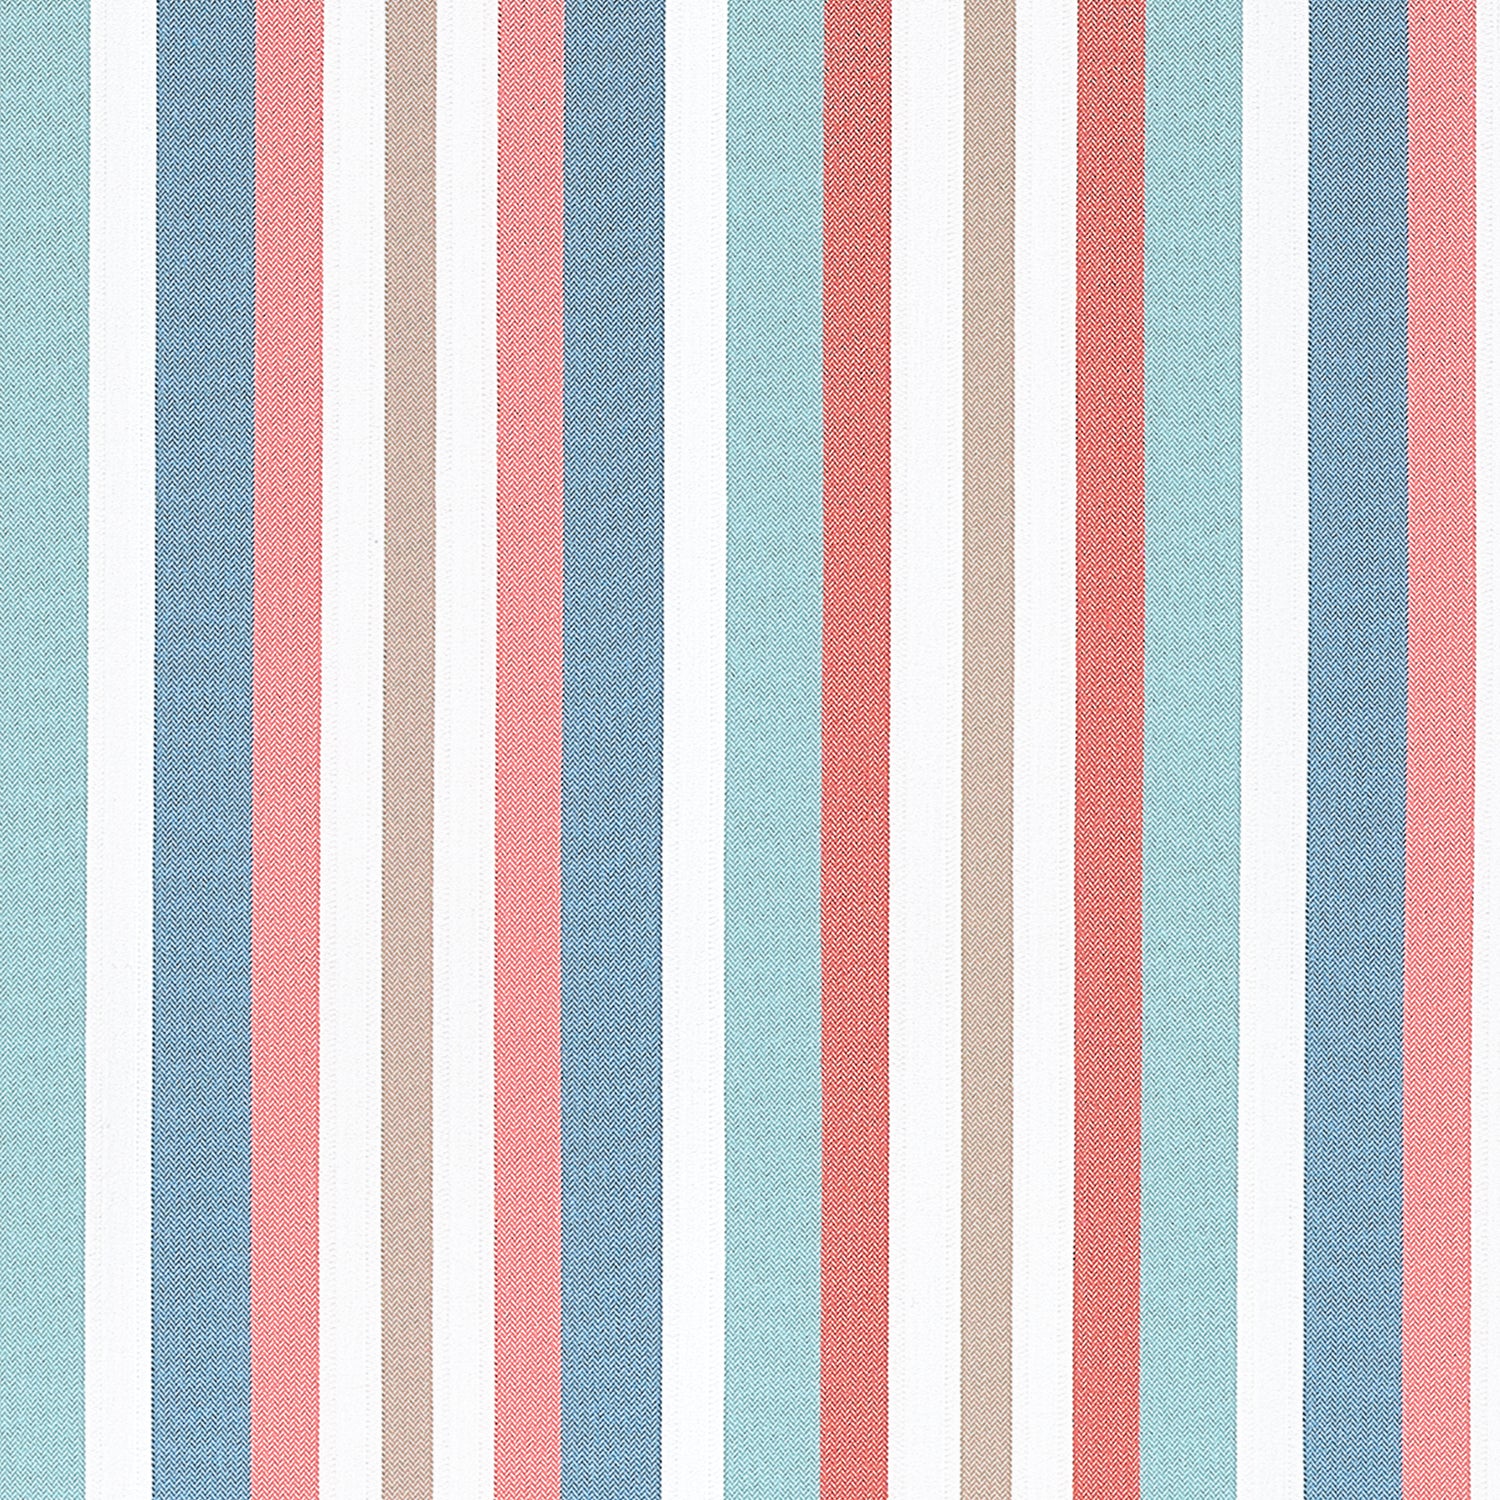 Kalea Stripe fabric in island color - pattern number W81665 - by Thibaut in the Locale collection